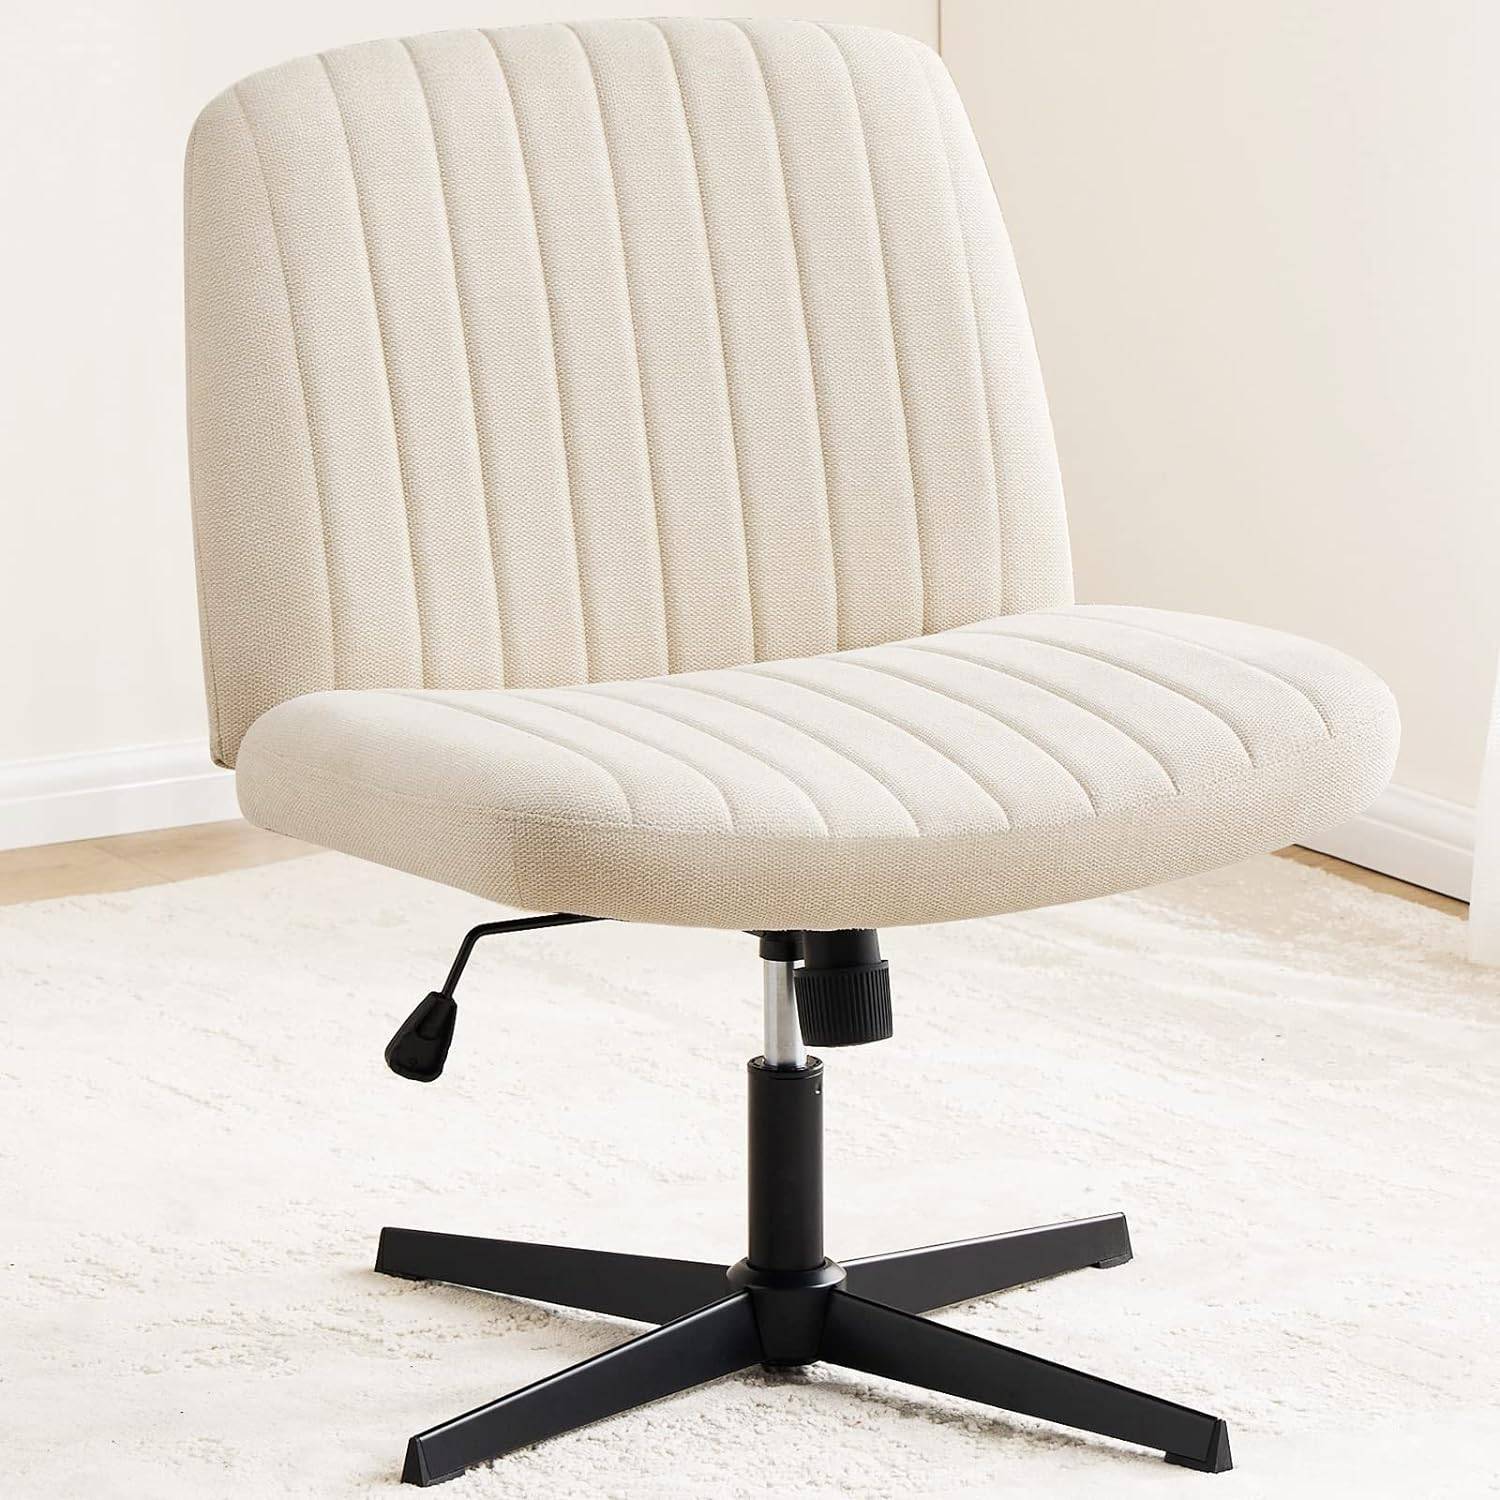 White cross-legged office chair product photo.